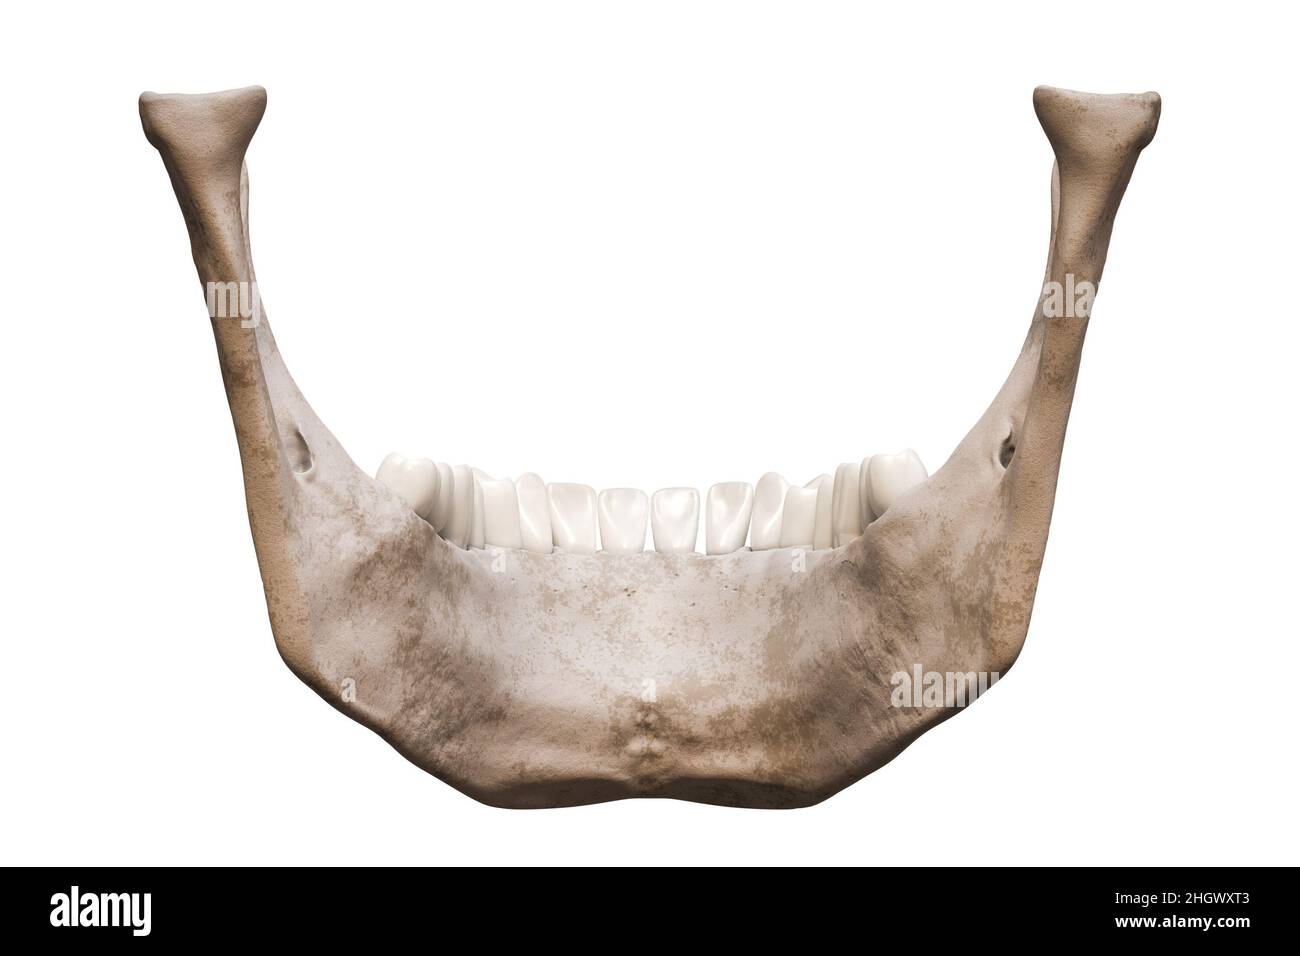 Human mandible or jaw bone with teeth posterior or back view anatomically accurate isolated on white background 3D rendering illustration. Anatomy, me Stock Photo